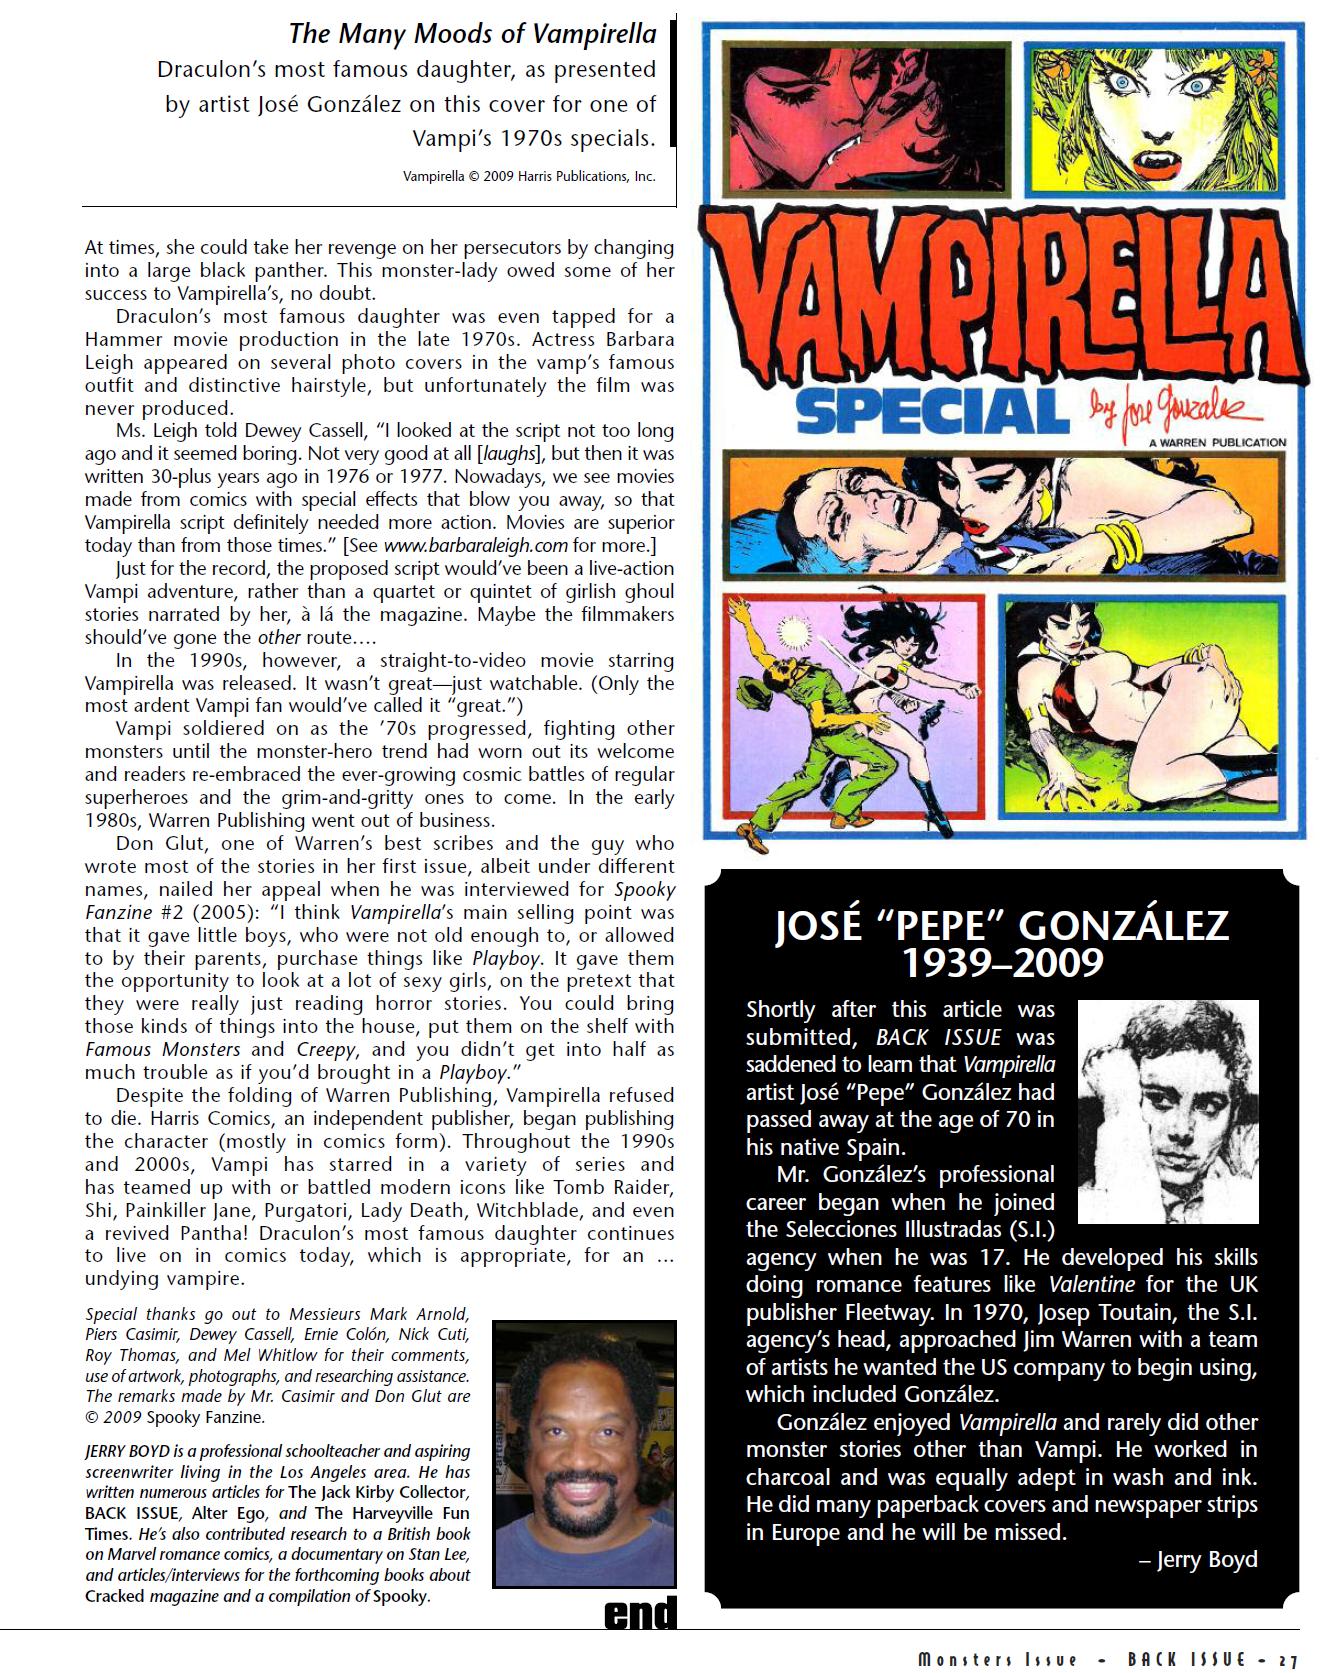 Read online Back Issue comic -  Issue #36 - 29